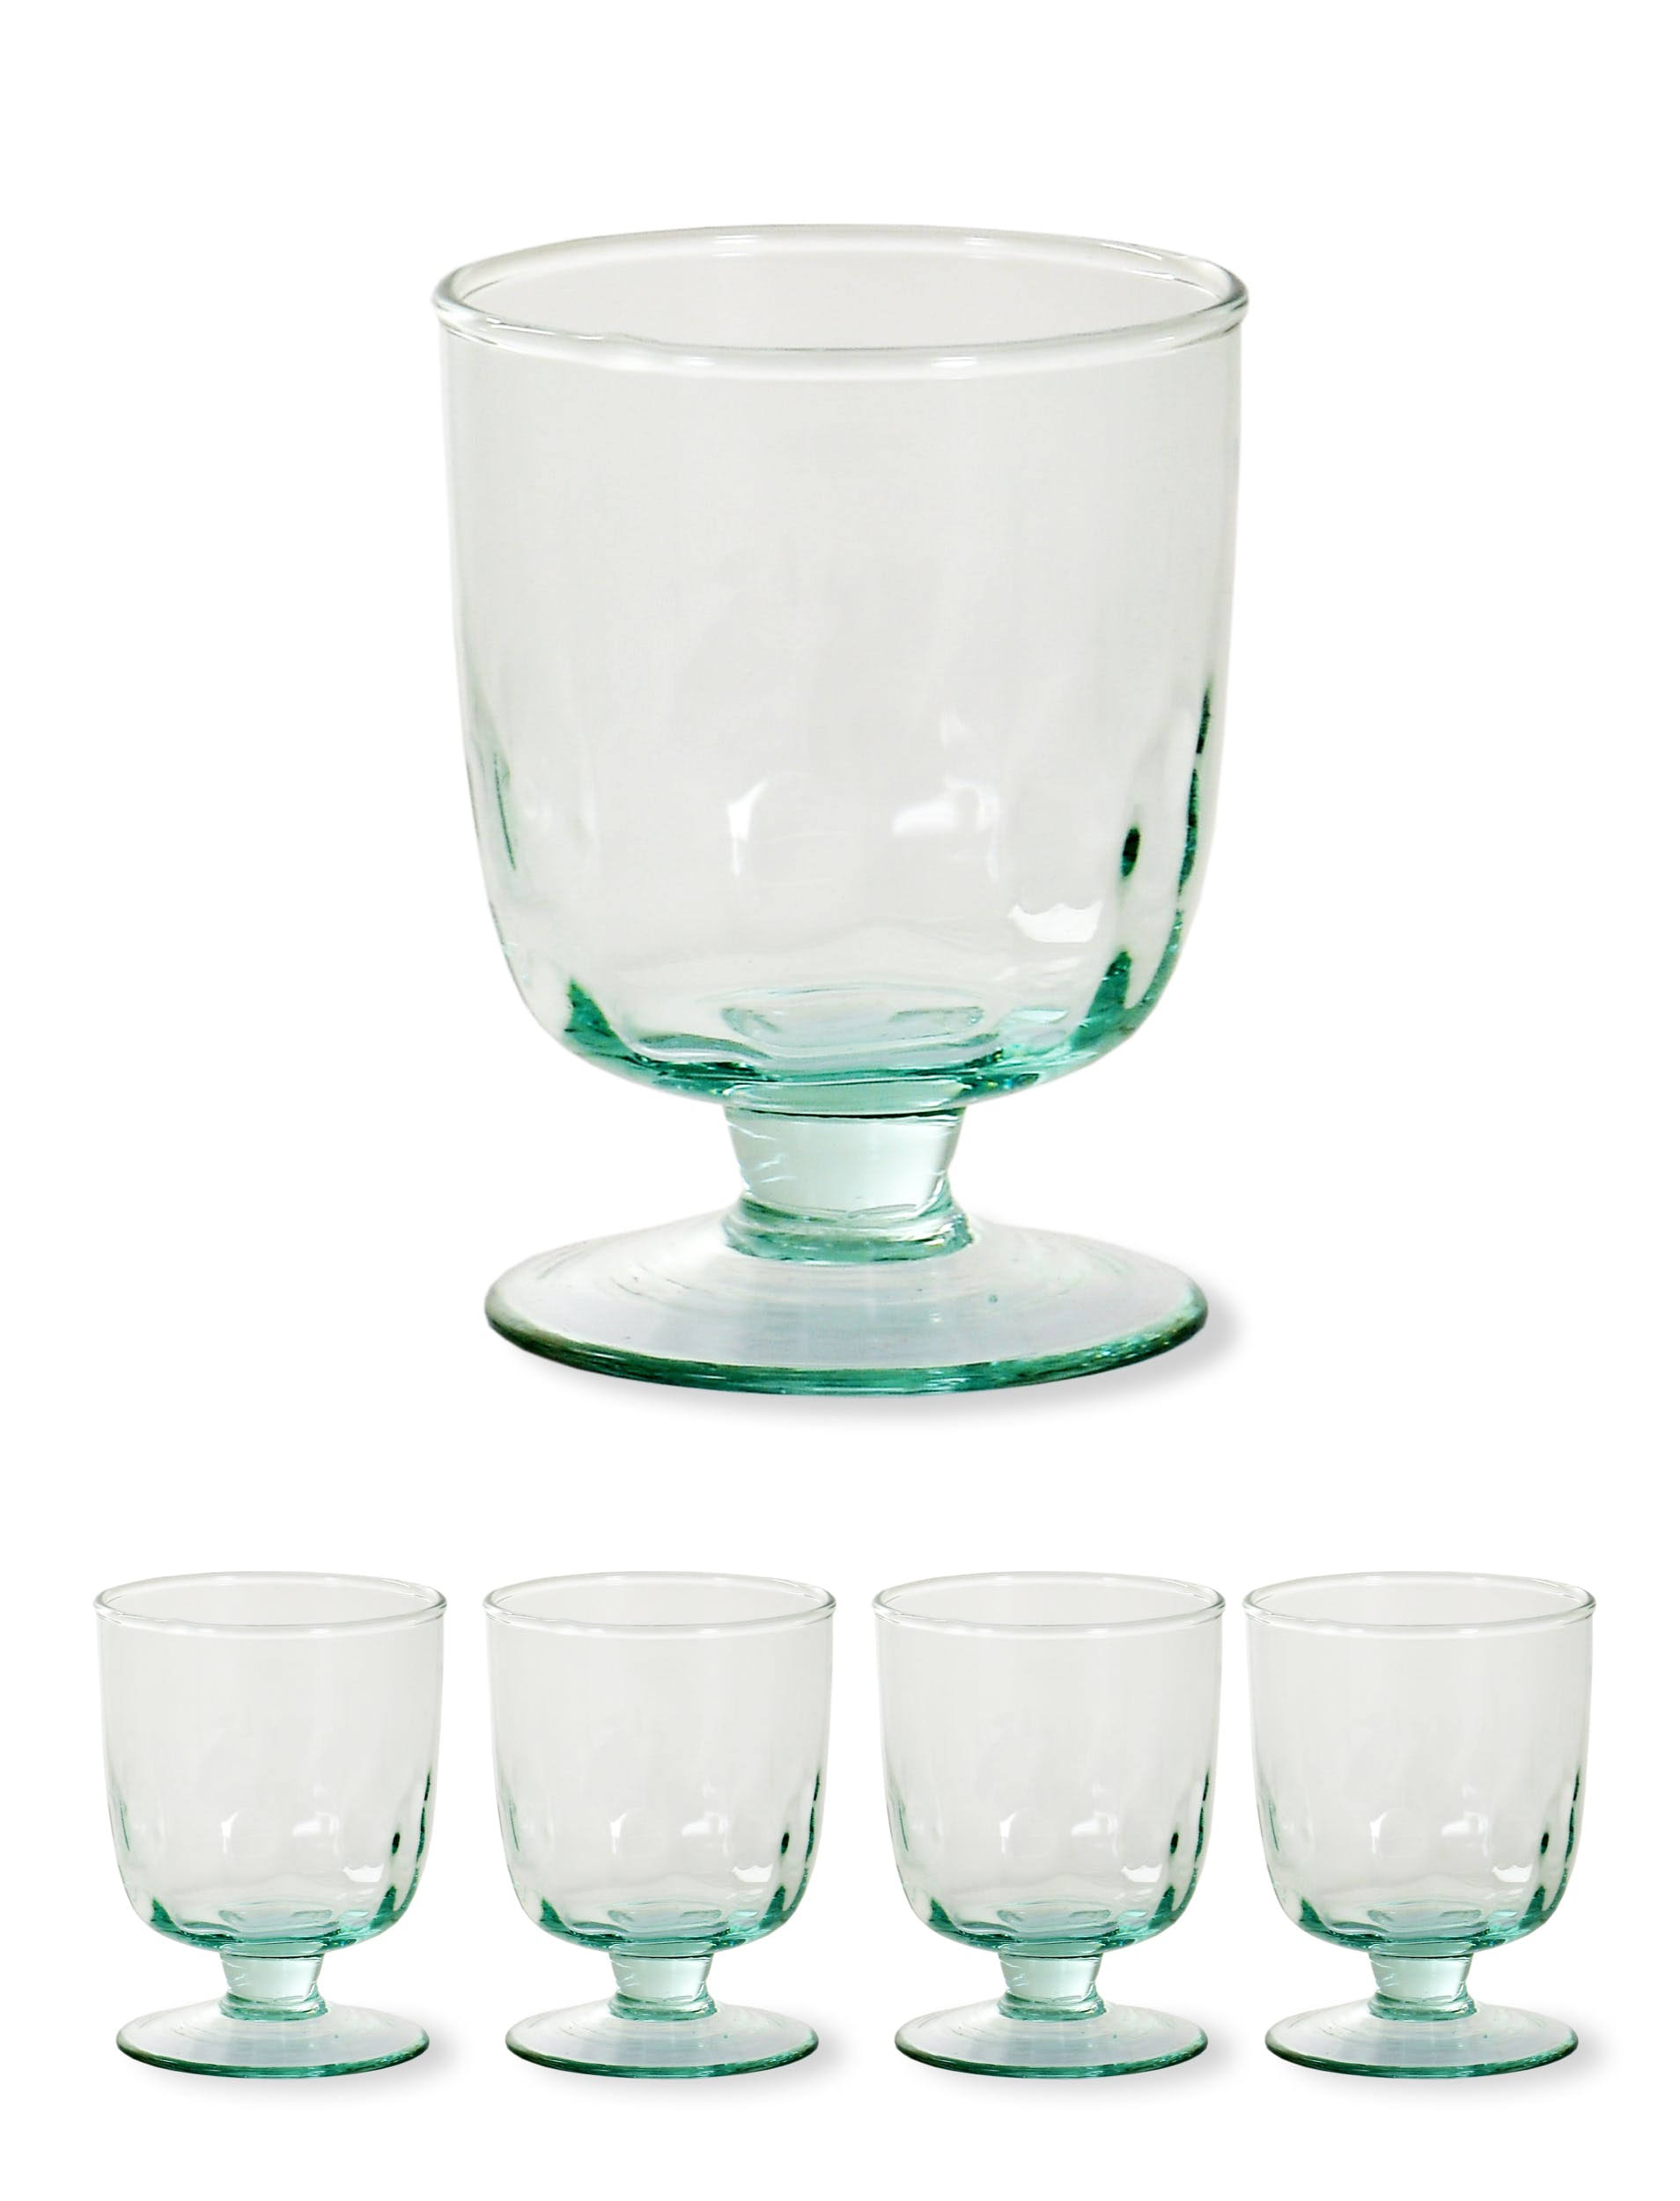 Garden Trading Set of 4 Broadwell Wine Glasses Recycled Glass